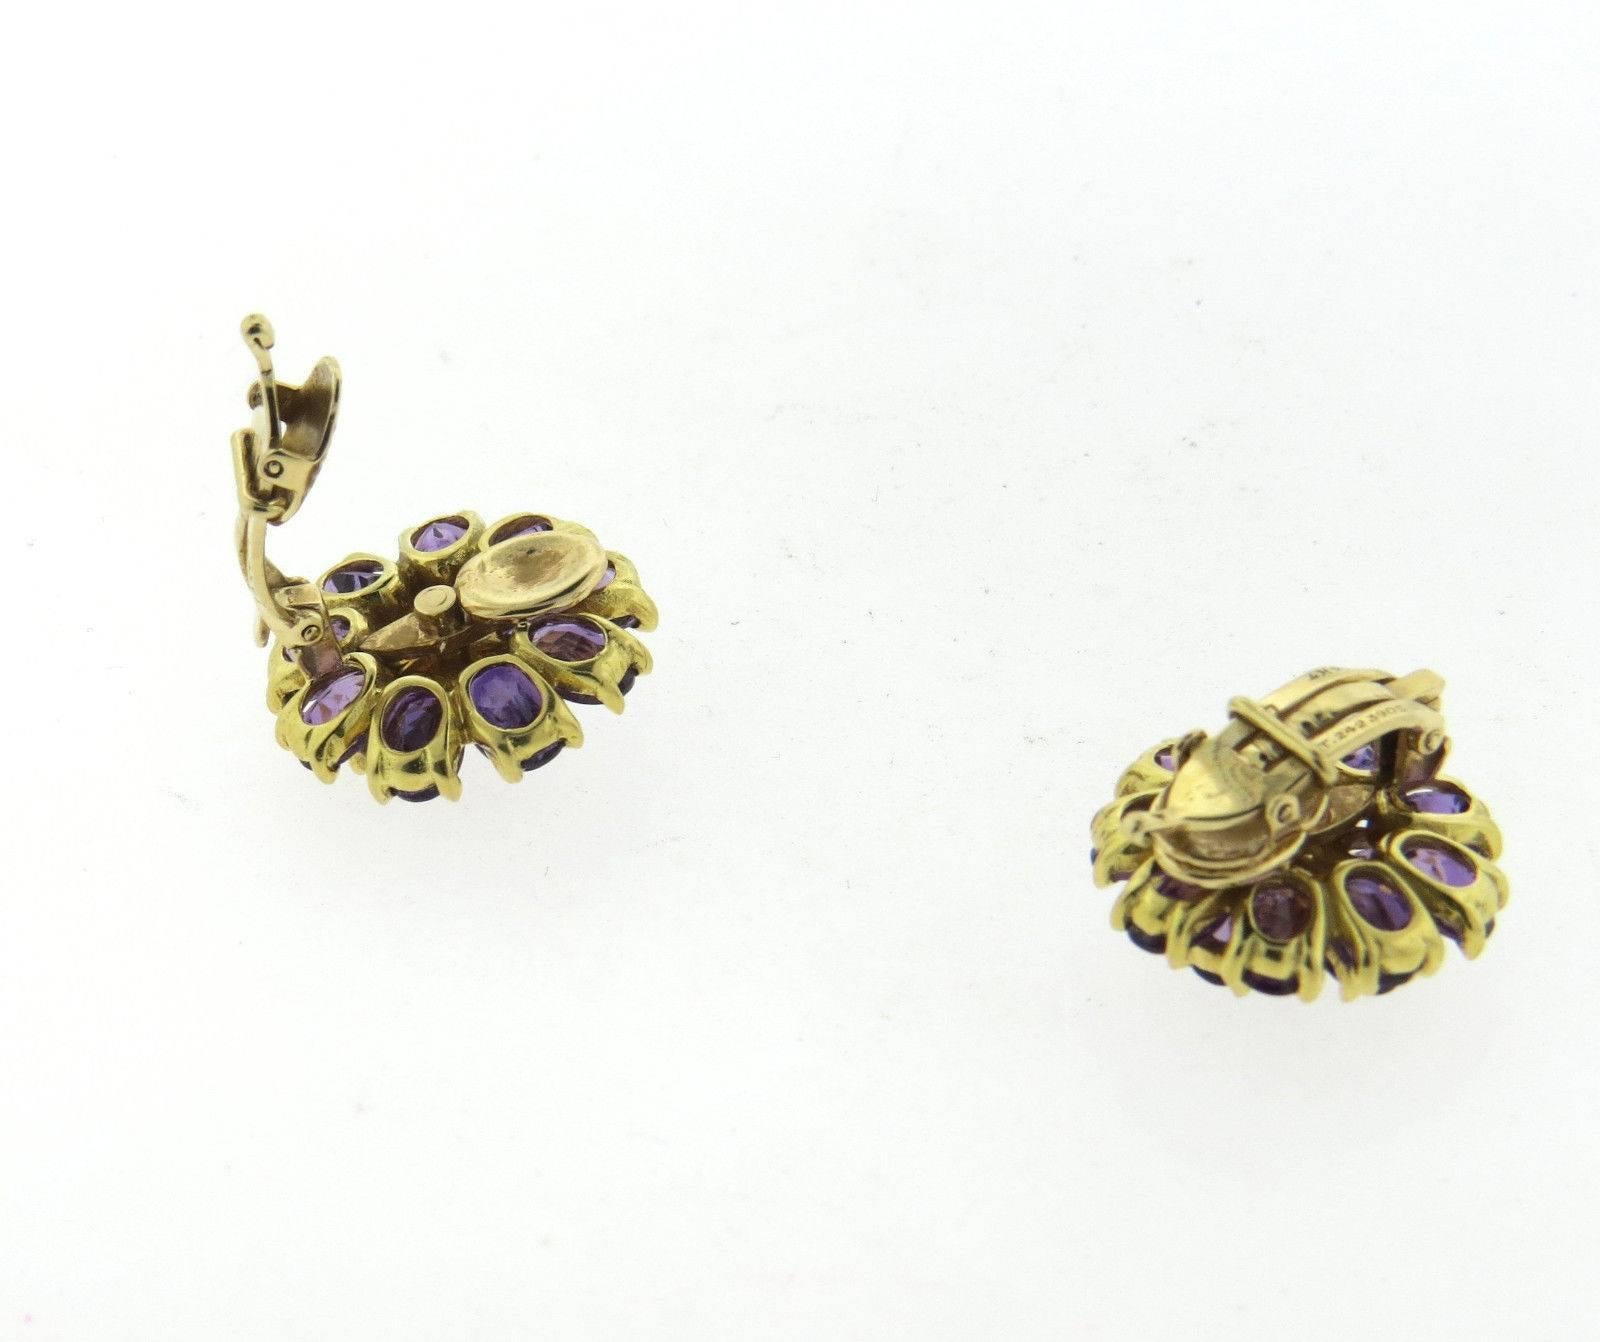 A pair of 14k yellow gold earrings set with amethyst and approximately 0.12ctw of diamonds. Earrings are 20mm in diameter and weigh 16.3 grams.  Marked: 14k, at.2423905